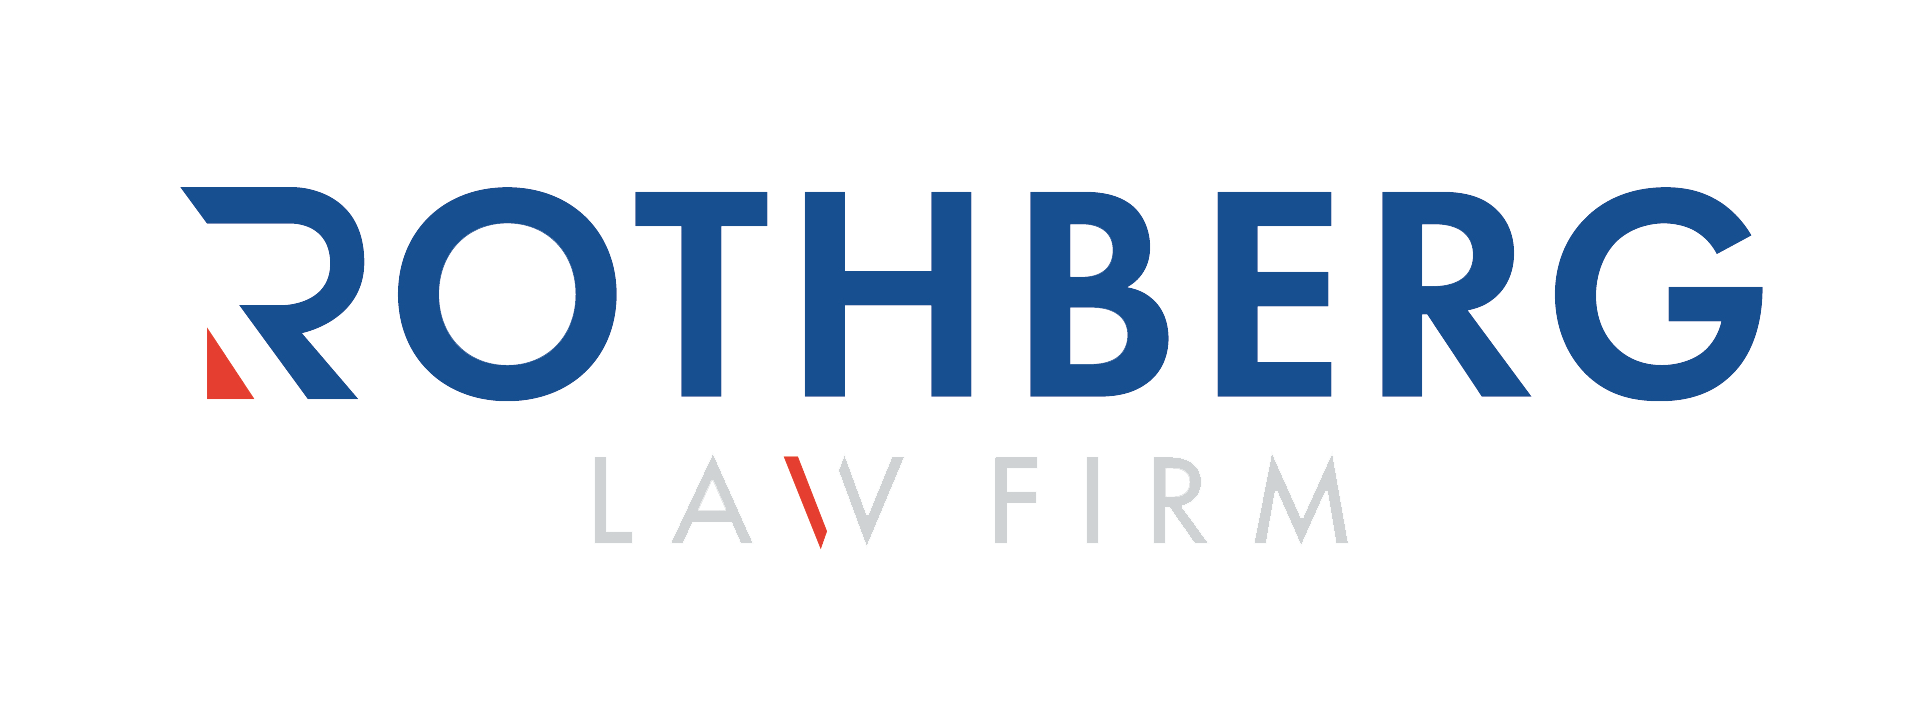 Rothberg Law Firm Logo